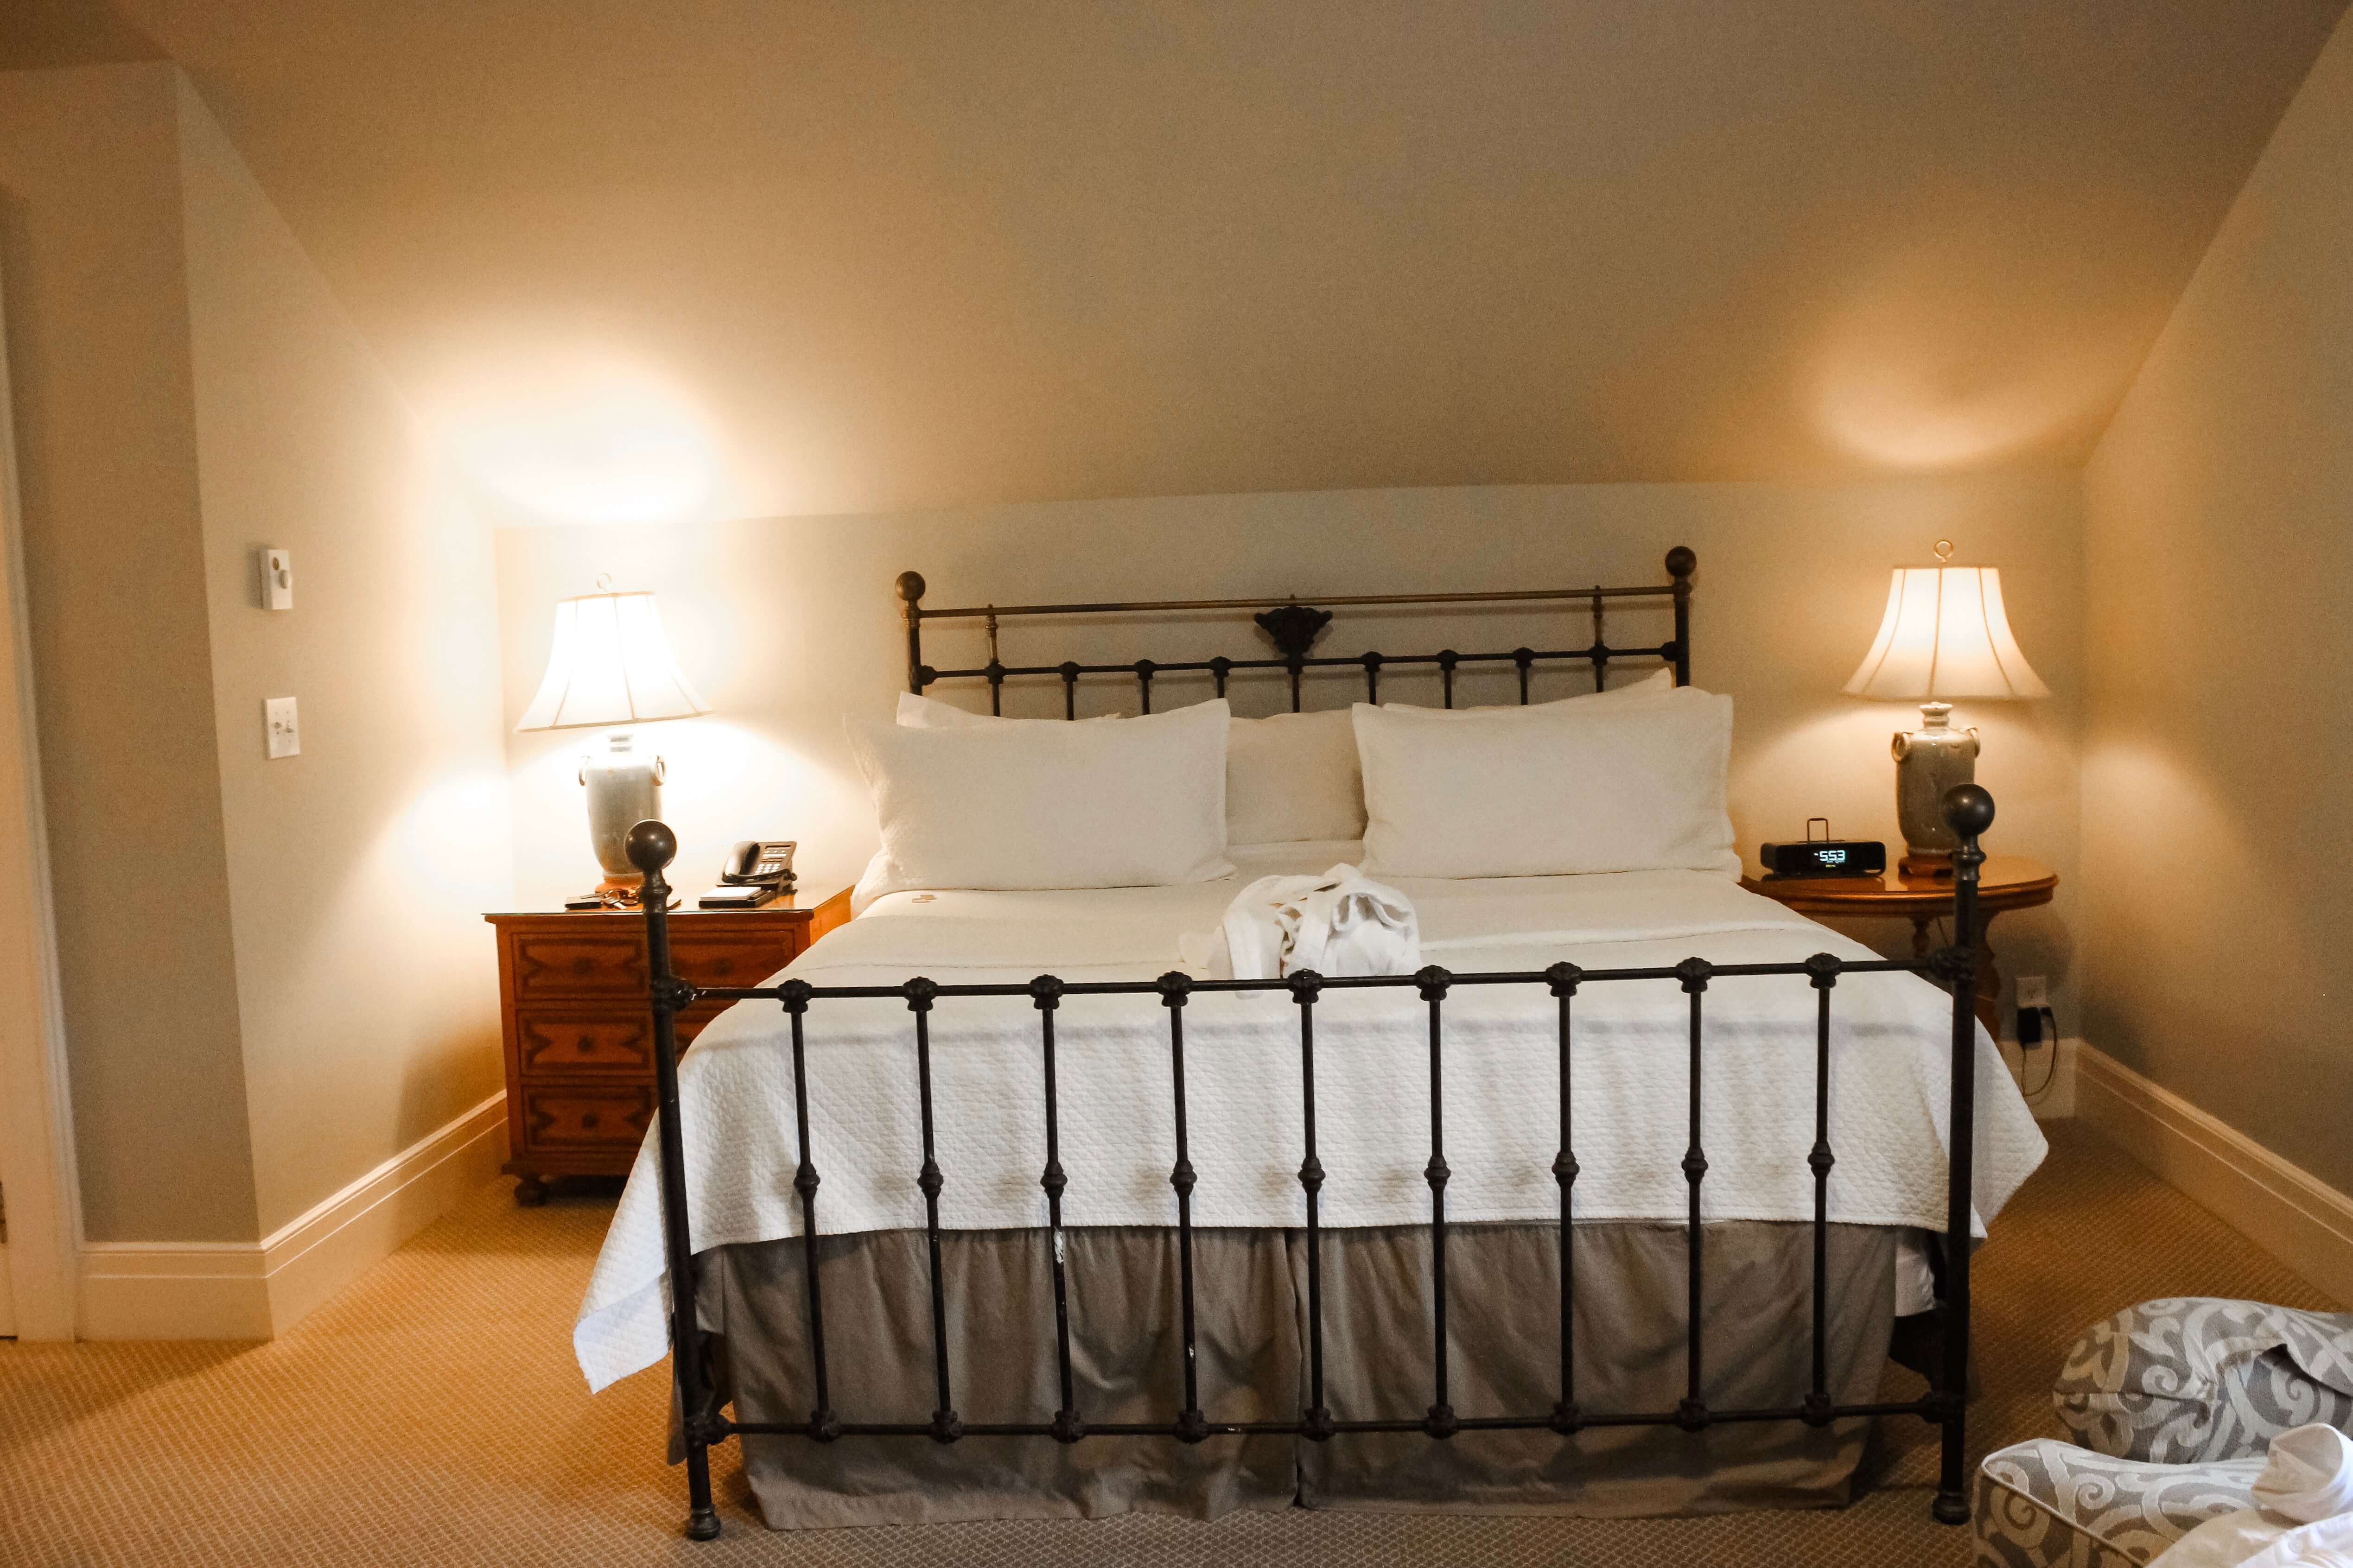 Makaela shares her recent experience and stay at the Duke Mansion in Charlotte, NC. It’s the perfect southern bed and breakfast in the heart of the metro city.